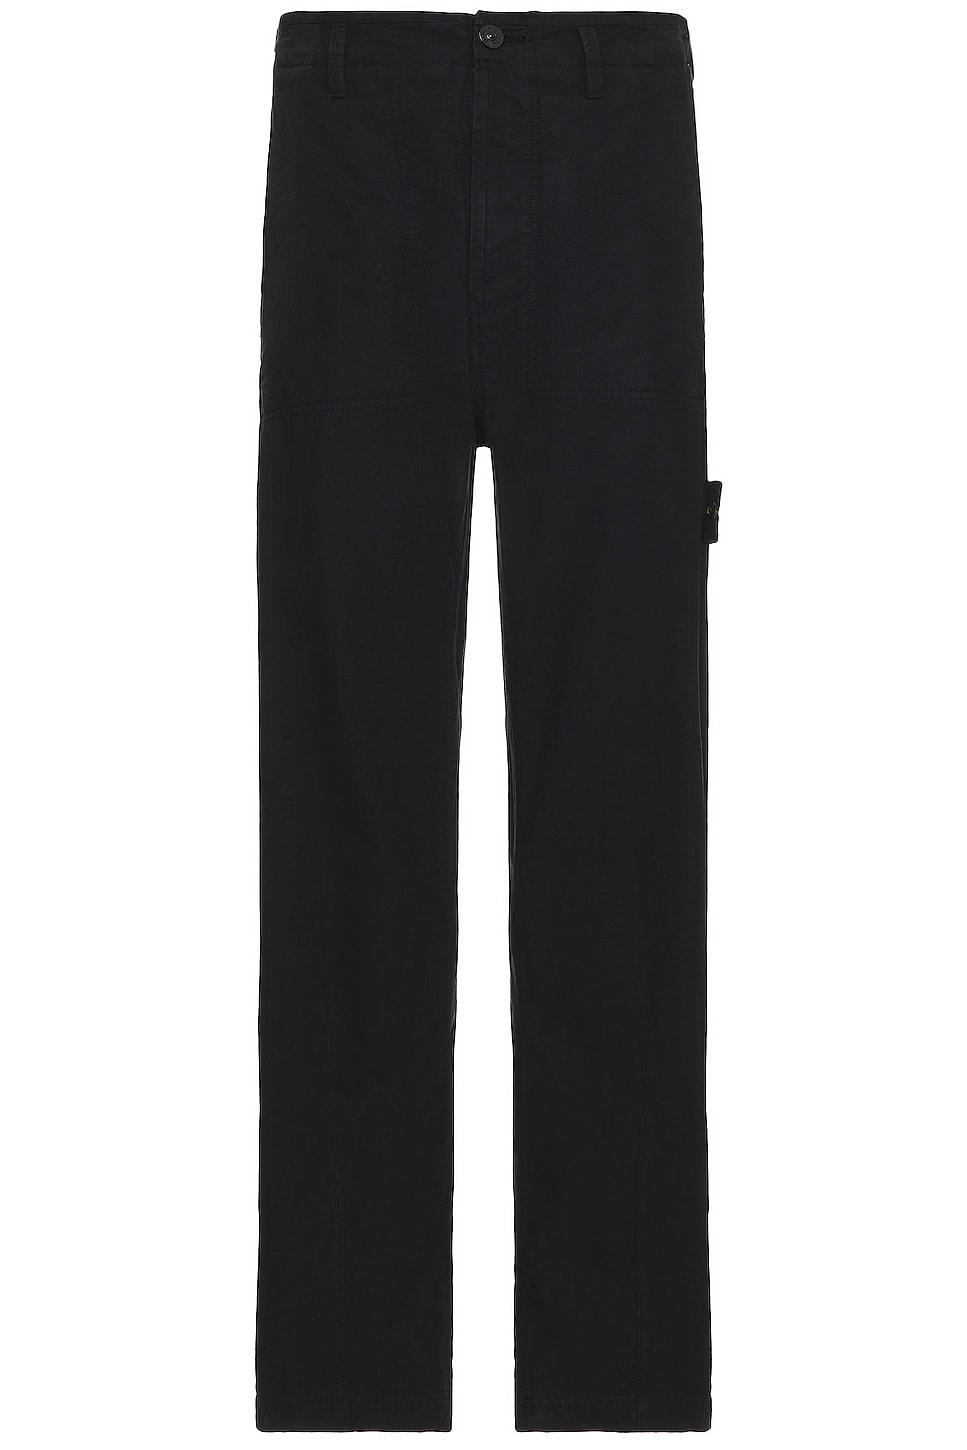 Image 1 of Stone Island Pants in Navy Blue